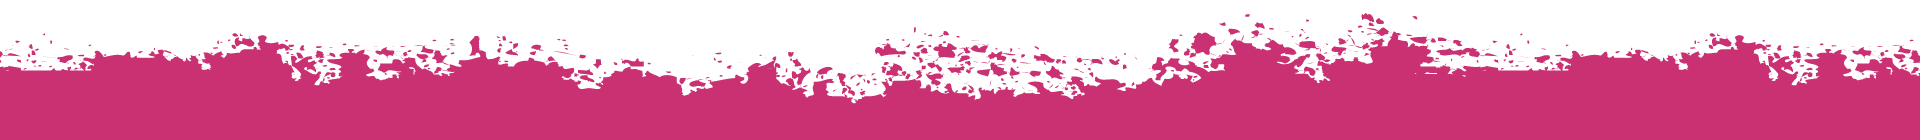 Pink and black grunge footer texture